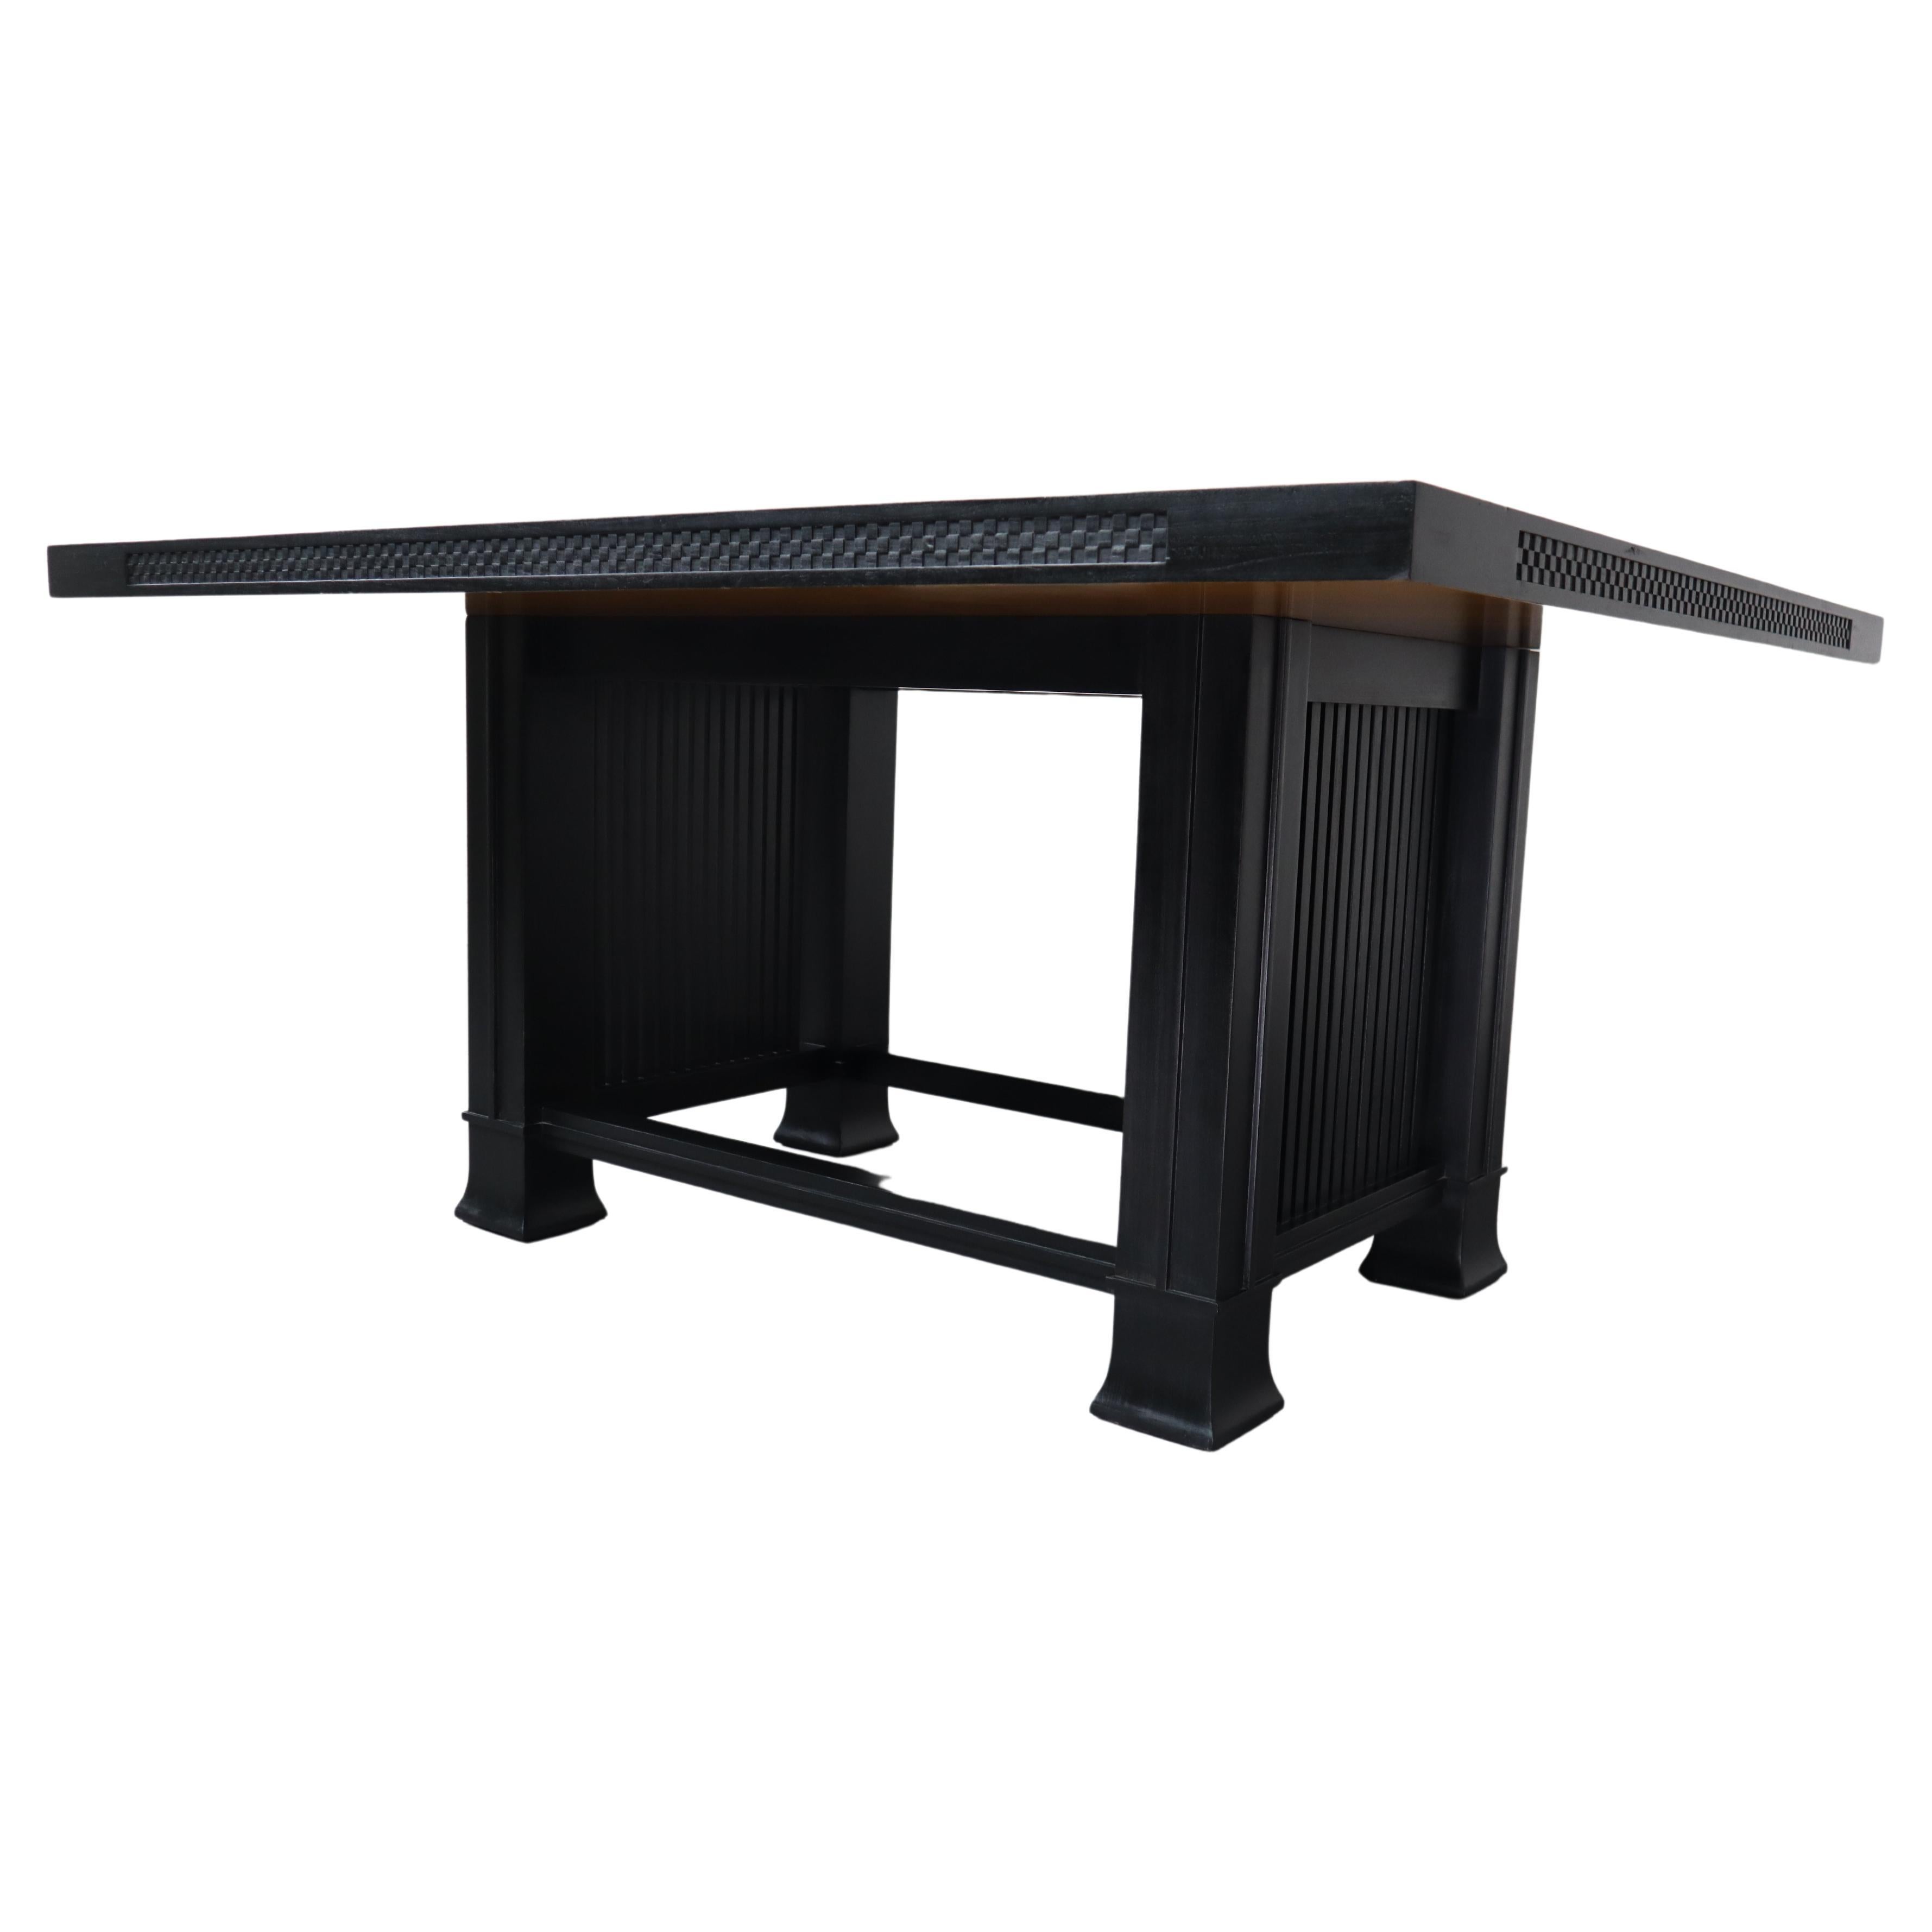 Husser 615 dining table by Frank Lloyd Wright for Cassina For Sale